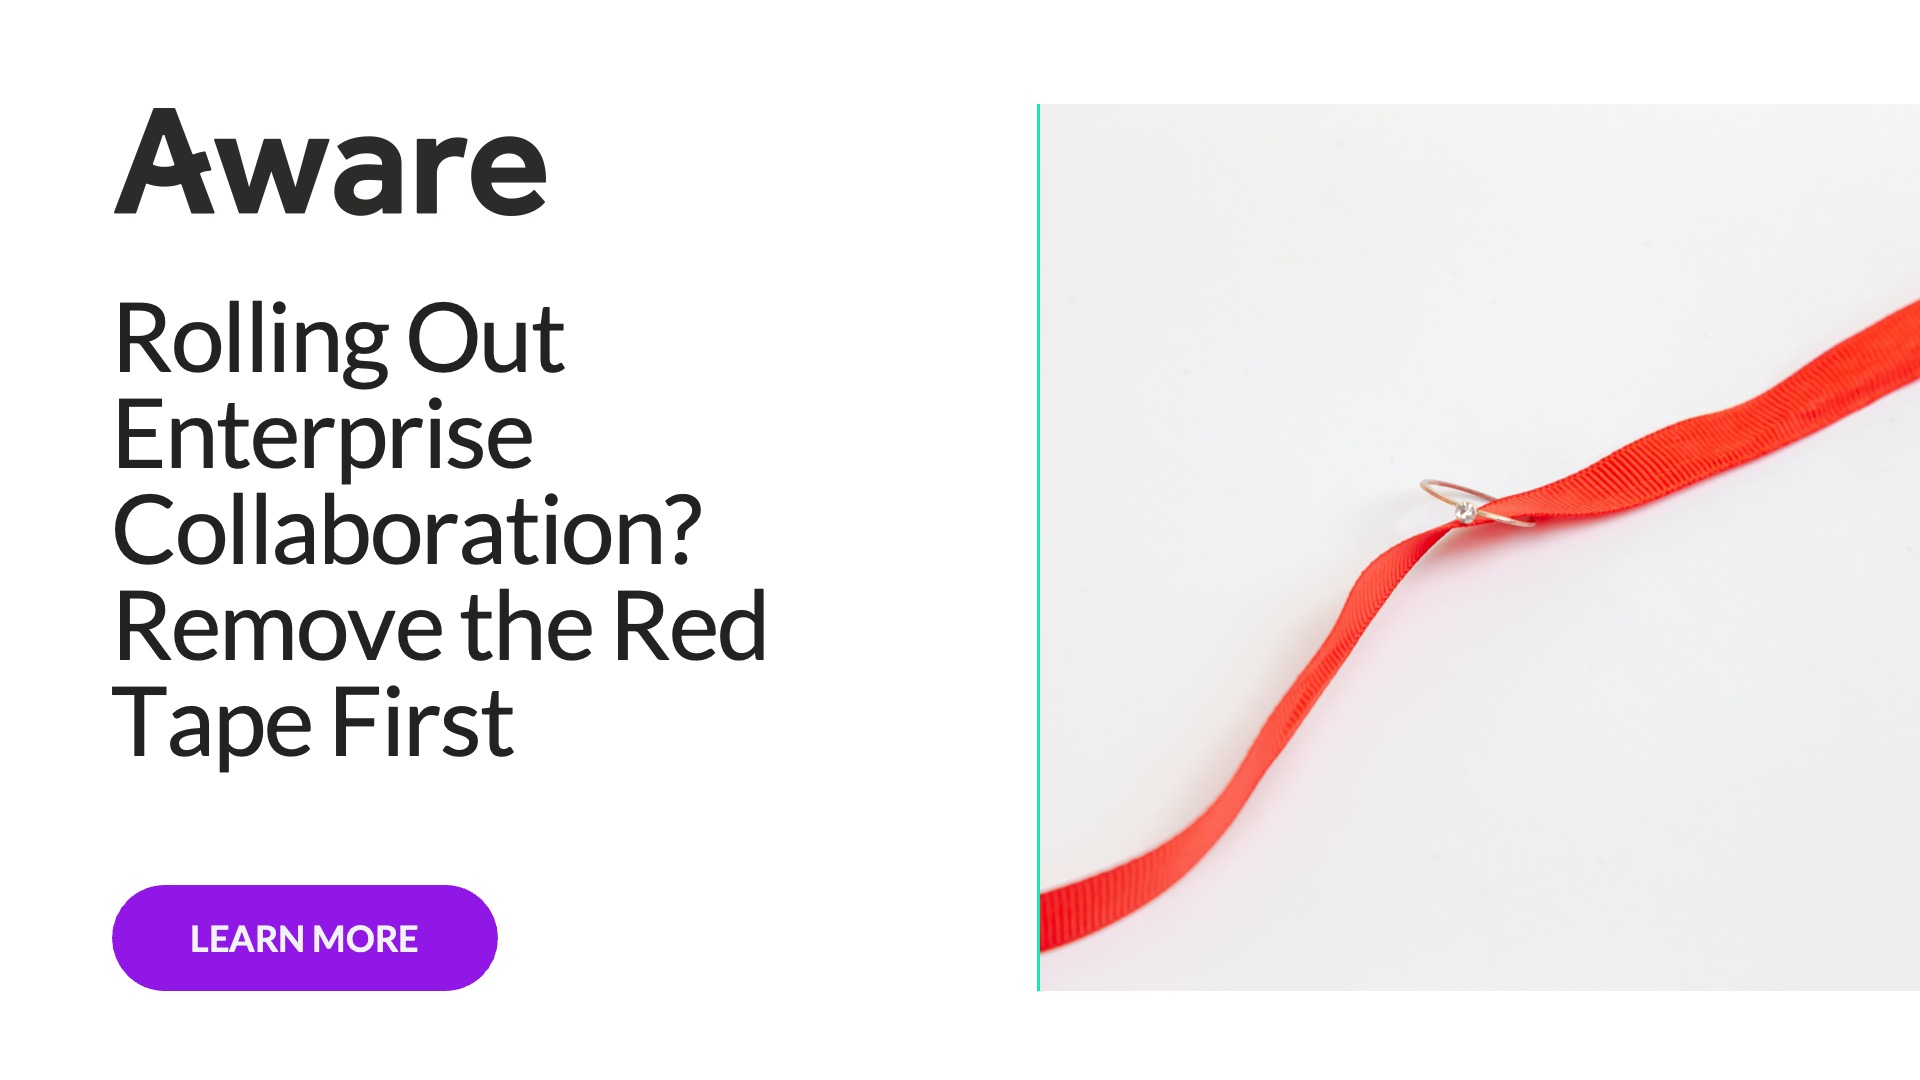 Rolling Out Enterprise Collaboration? Remove the Red Tape First